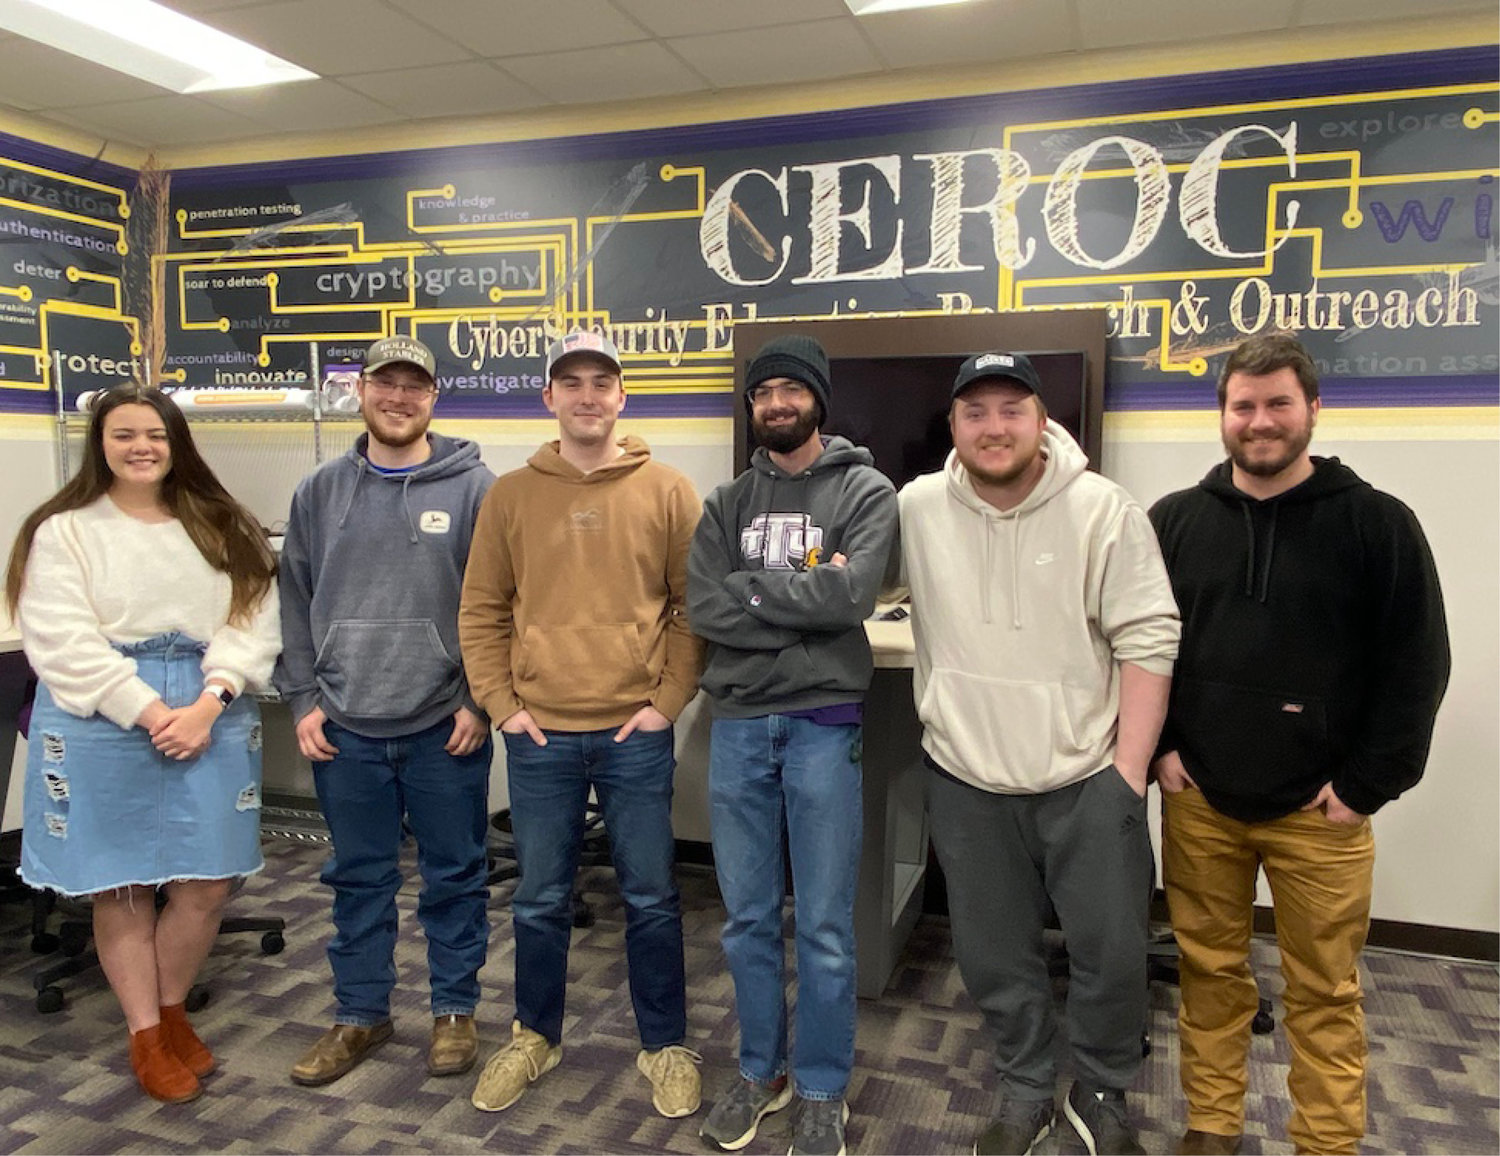 Cybersecurity Team members, from left, are Kaitlyn Carroll, Jesse Holland, Austin Brown, Jacob Sweeten, Austin Tice and Coach Travis Lee. Not pictured is team member John Housley.